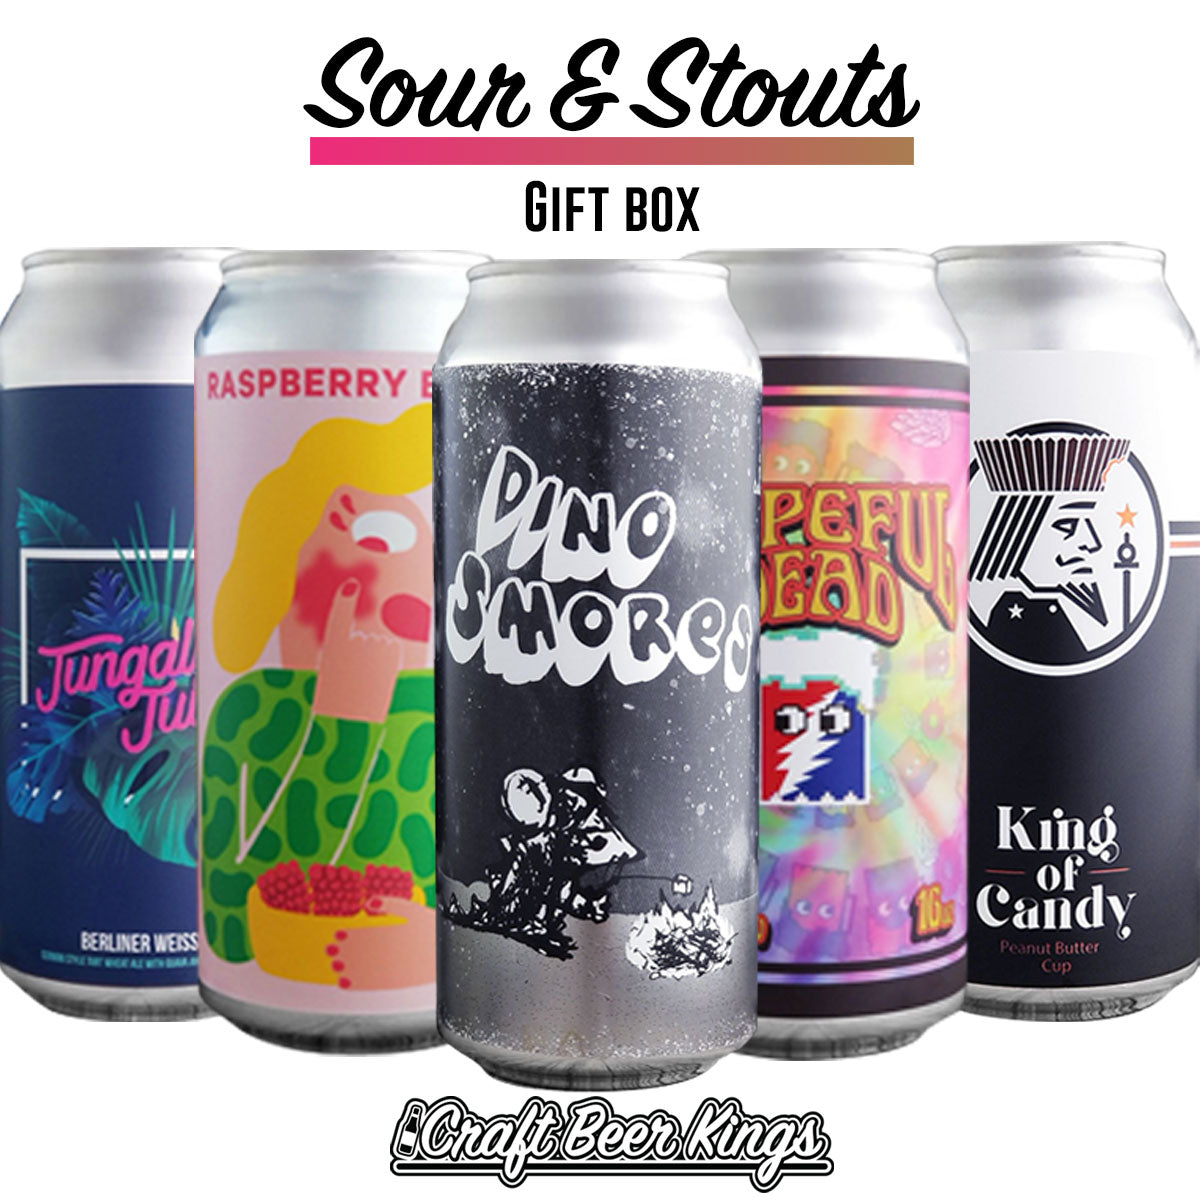 Sour and Stout Gift Box - Free shipping!